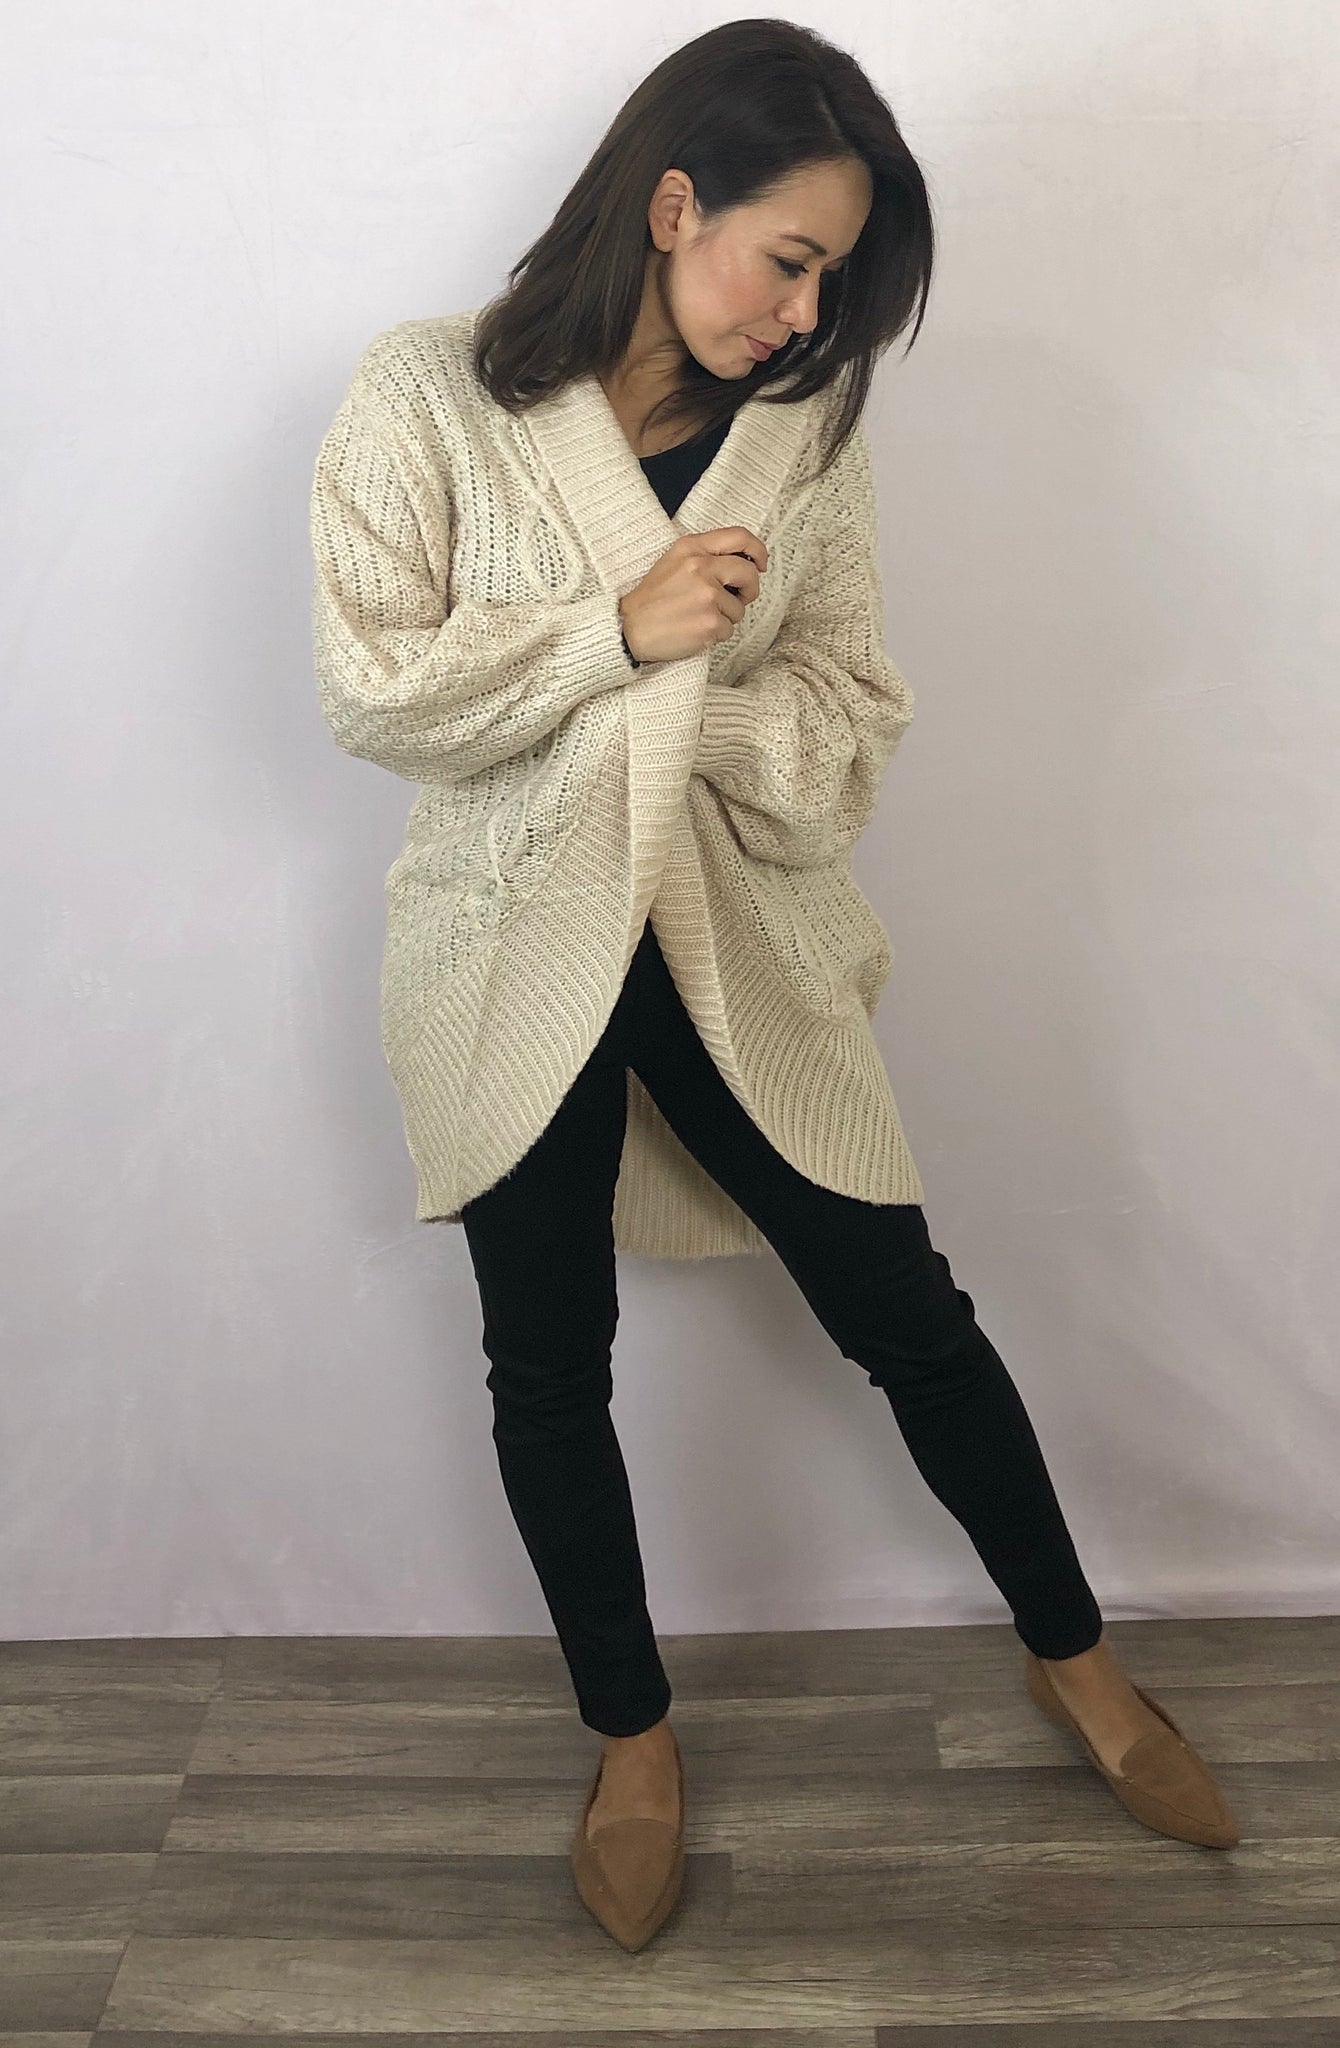 Bulky Cable Cardigan